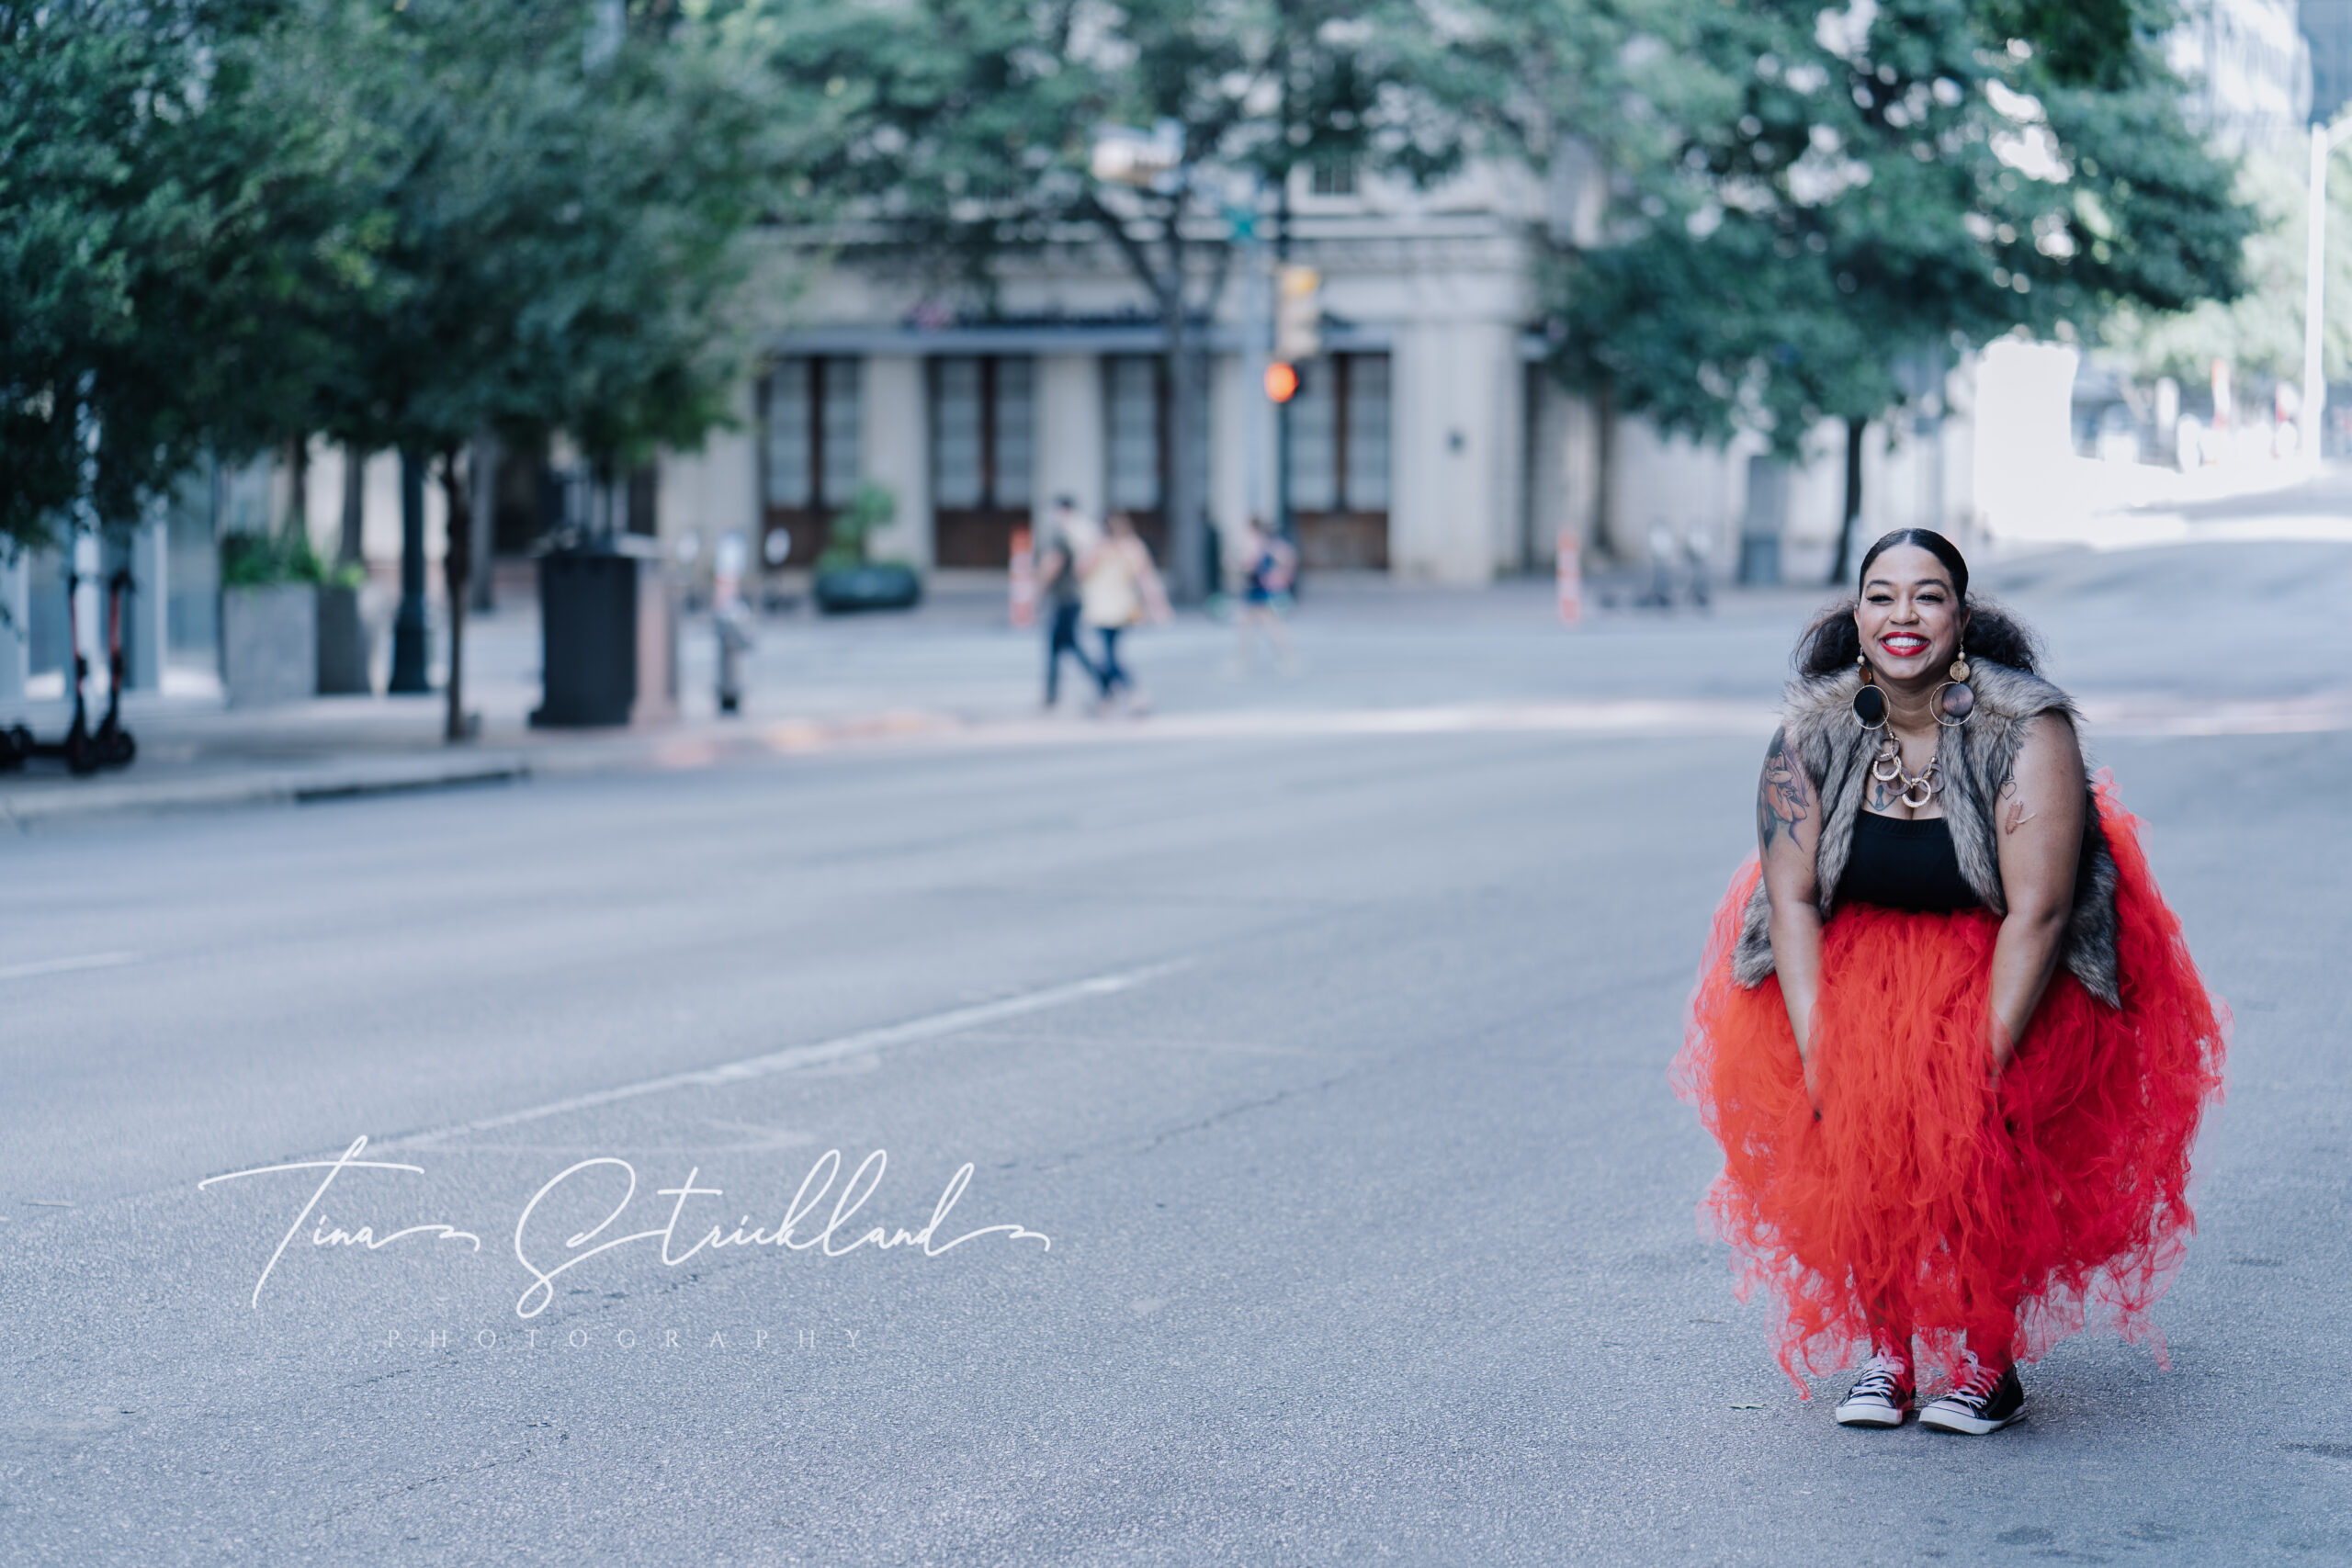 Full-figured woman wearing a red tutu, and standing in the street